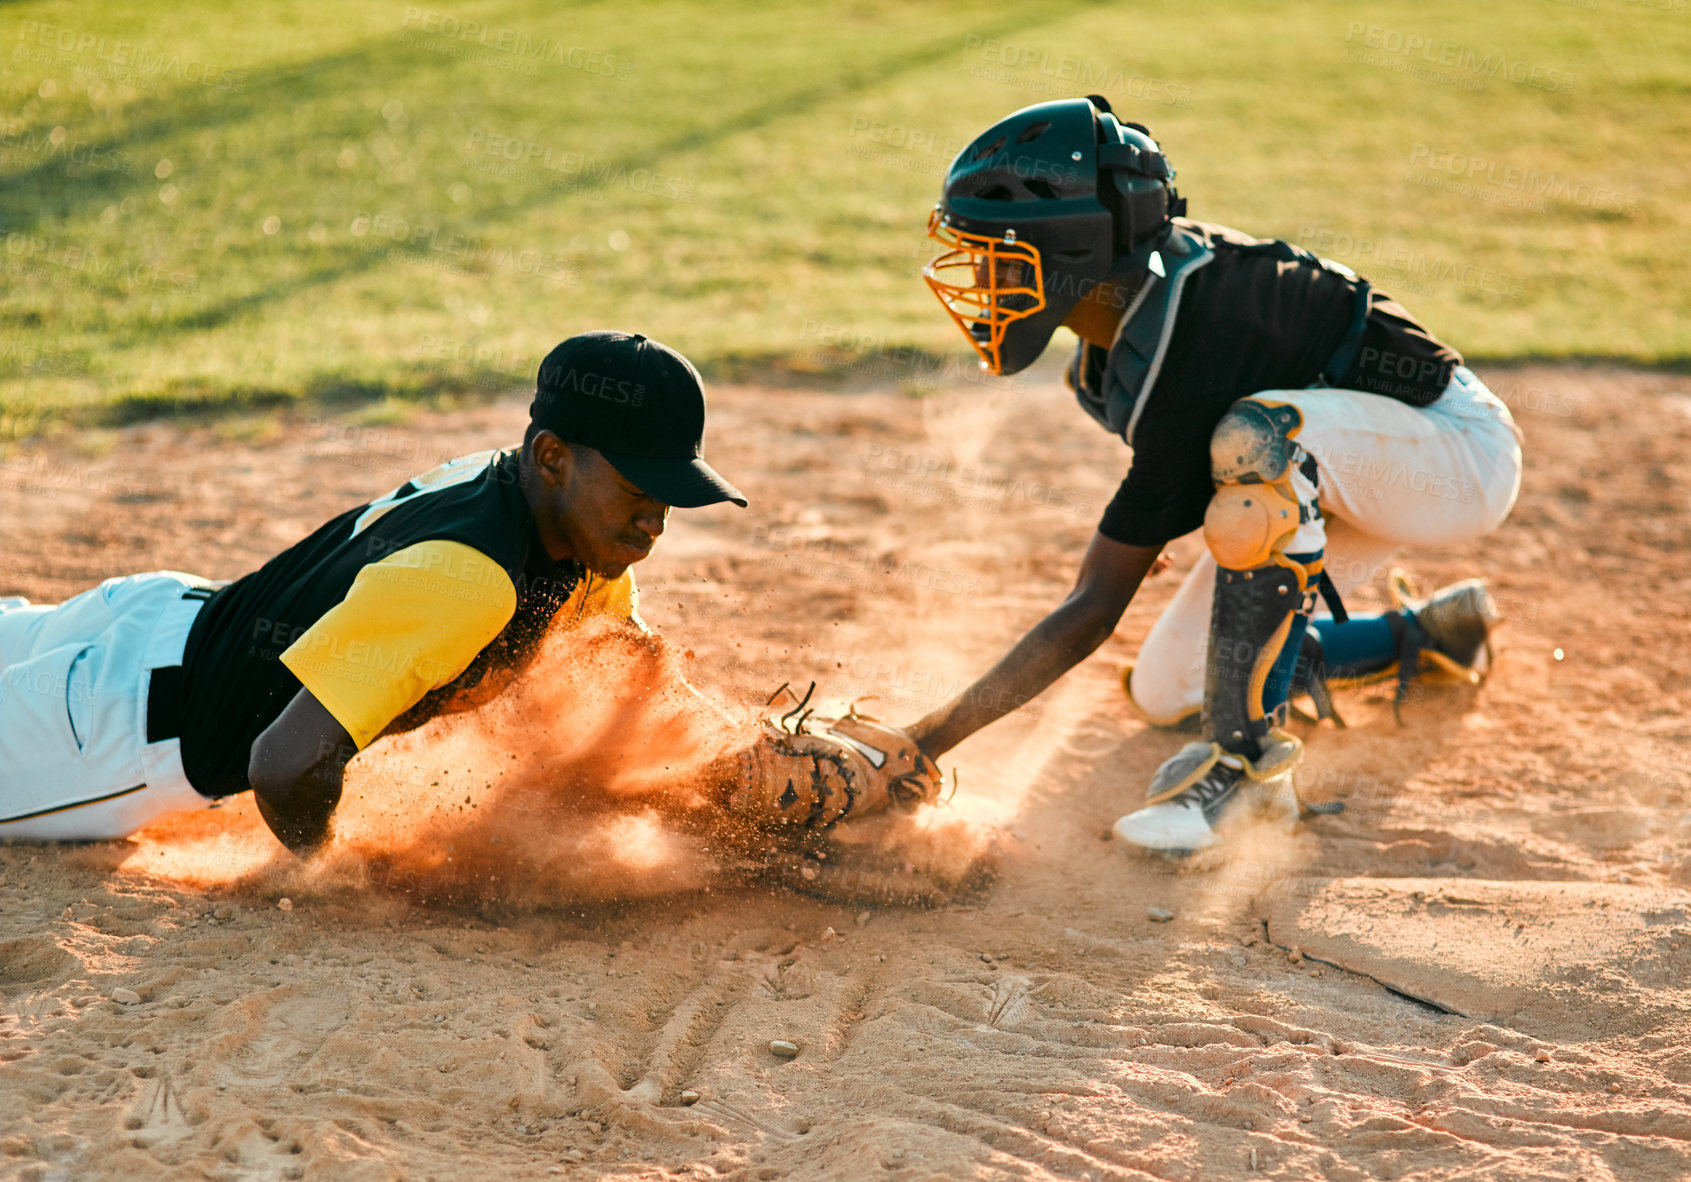 Buy stock photo Shot of a baseball player sliding to the base during a baseball game